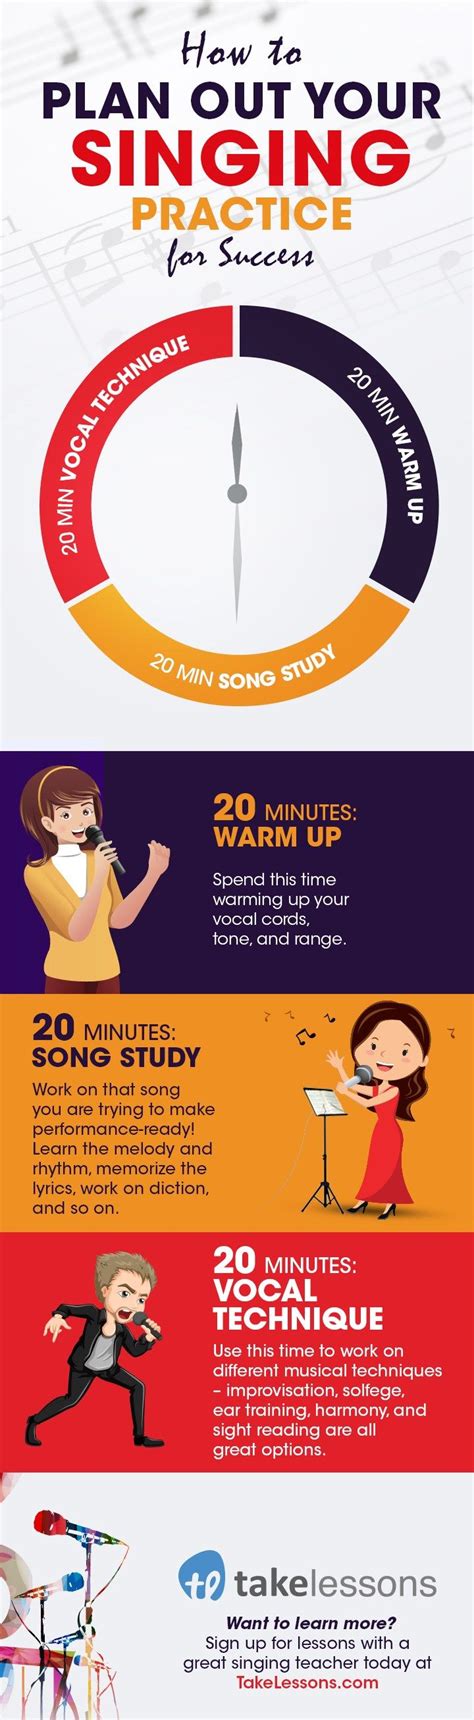 singers structure  singing practice infographic